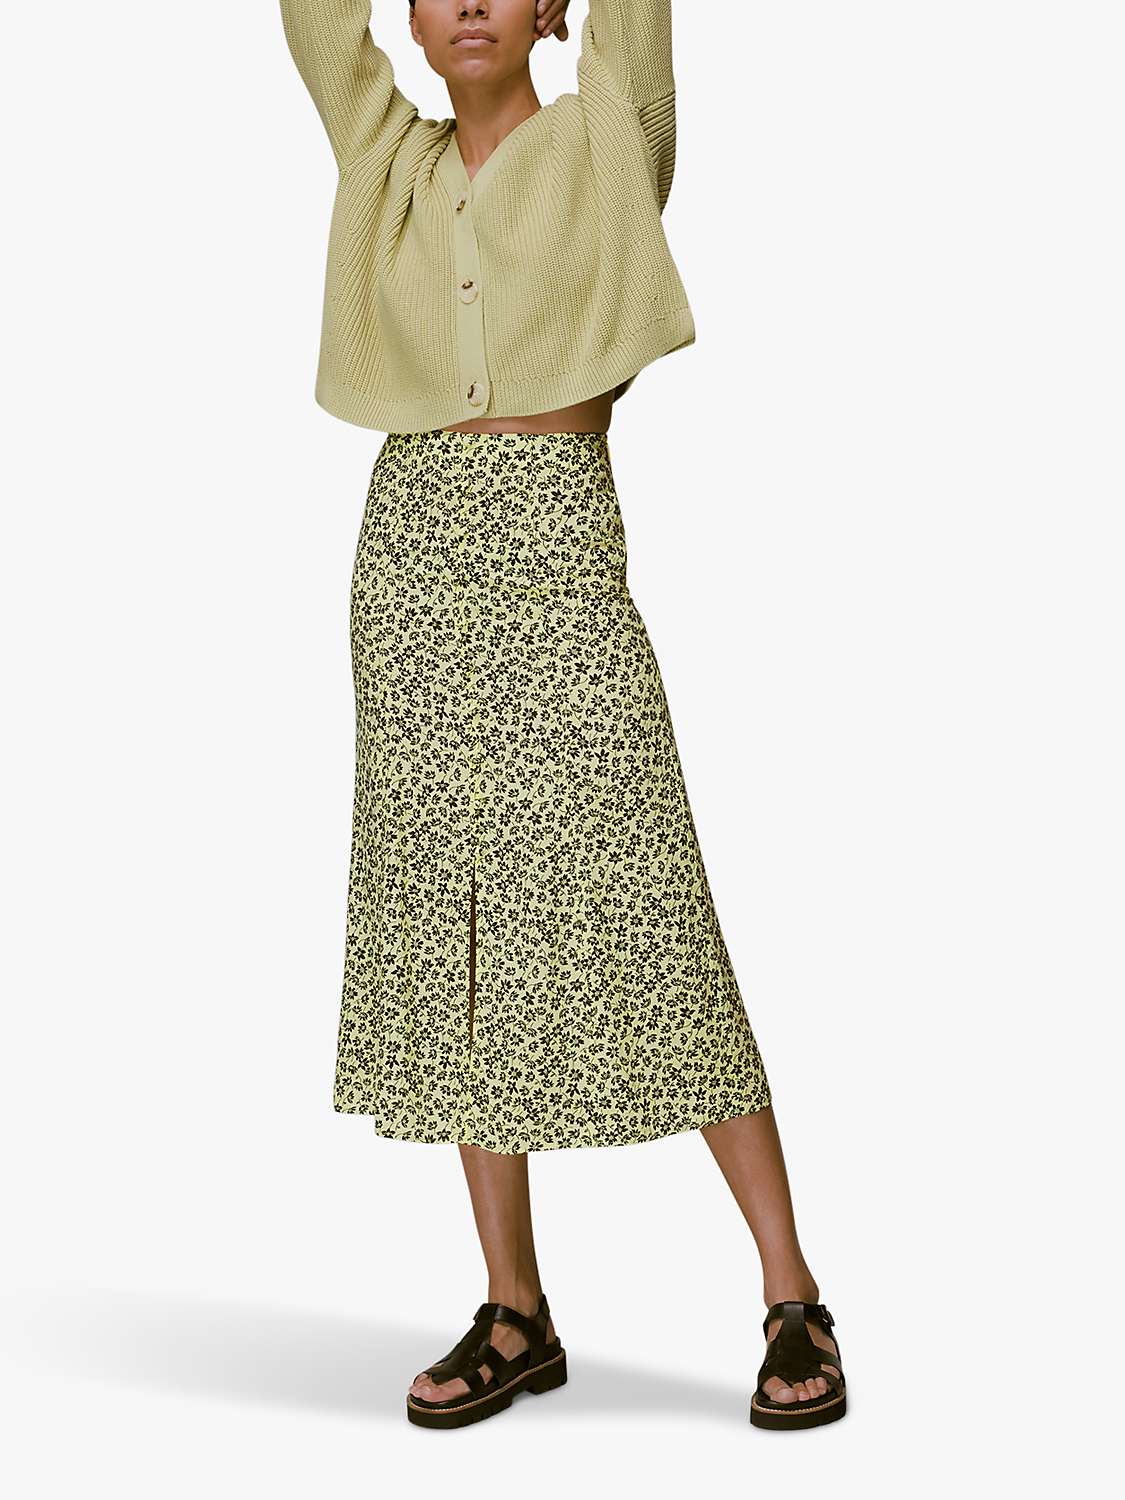 Buy Whistles Buttercup Floral Print Midi Skirt, Yellow/Multi Online at johnlewis.com